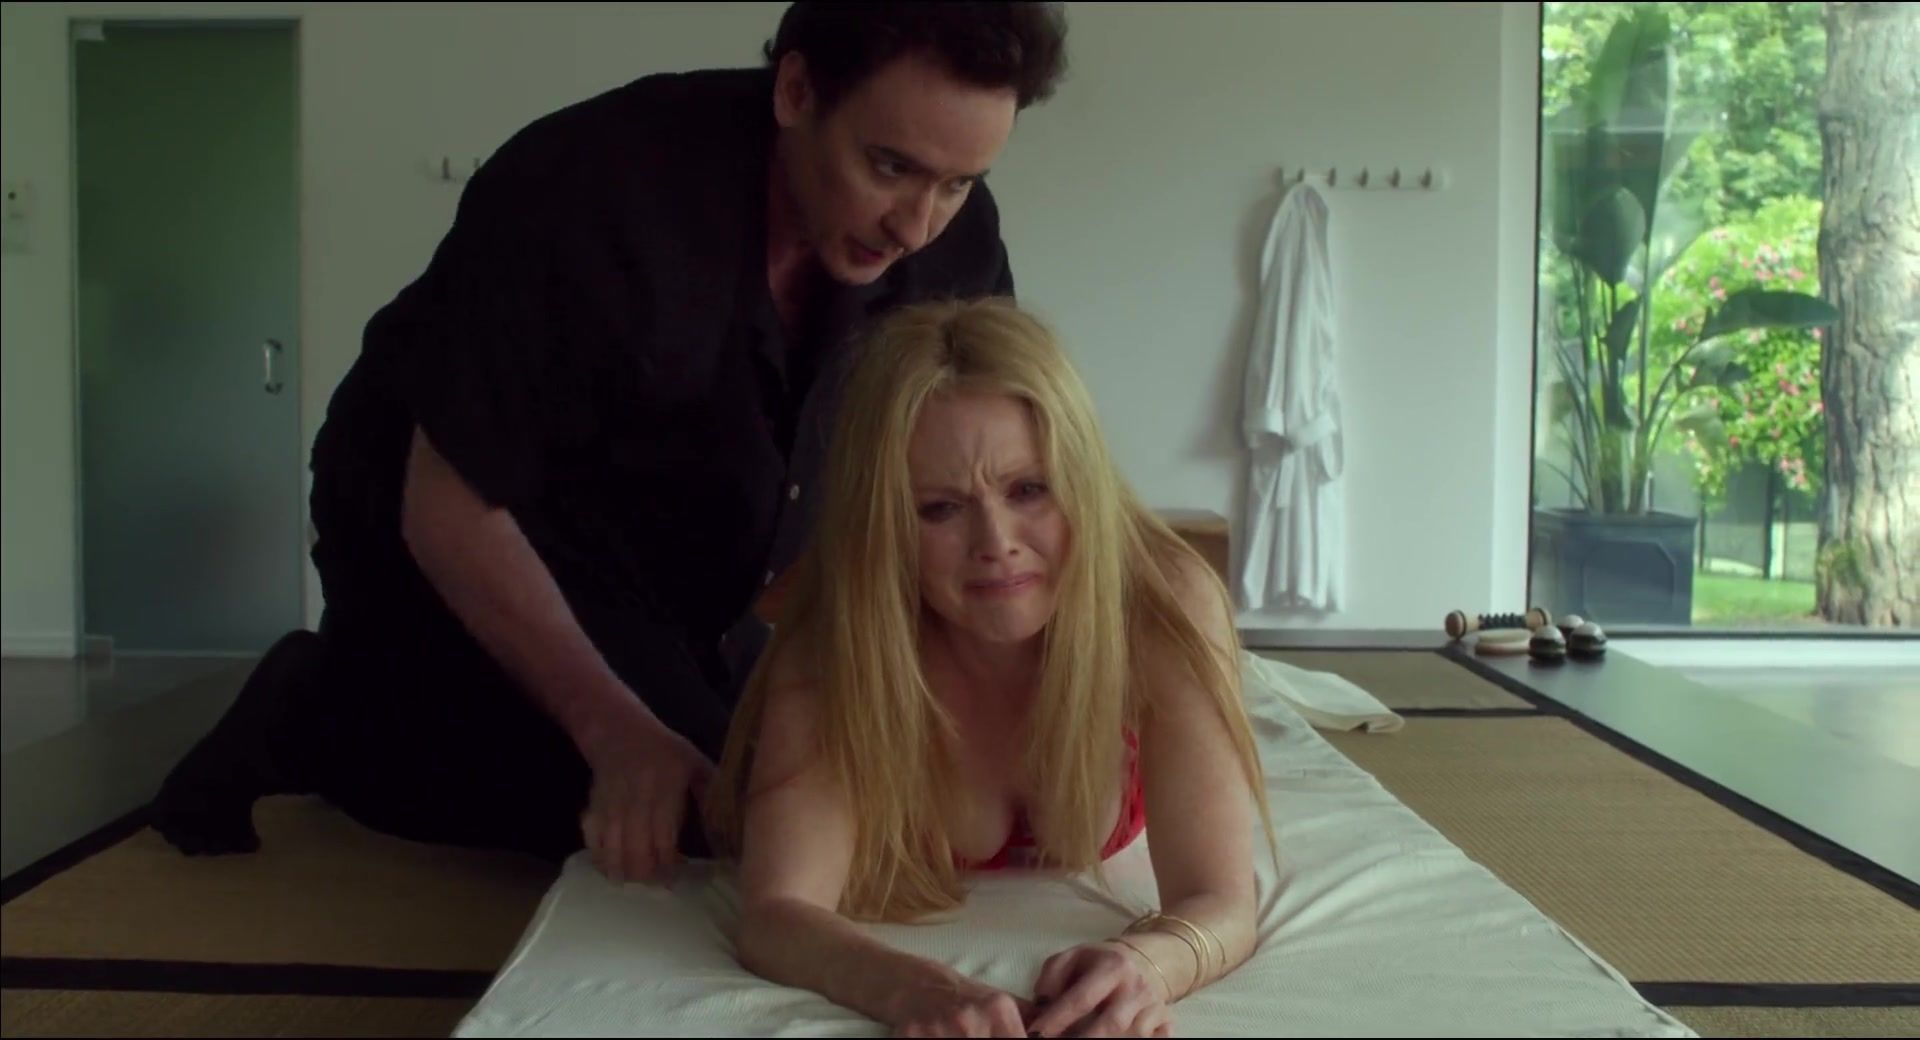 Amateurs Gone Submission video & Lesbian Celebs Scene | Celebrity: Julianne Moore nude | The movie "Maps to the Stars" Pururin